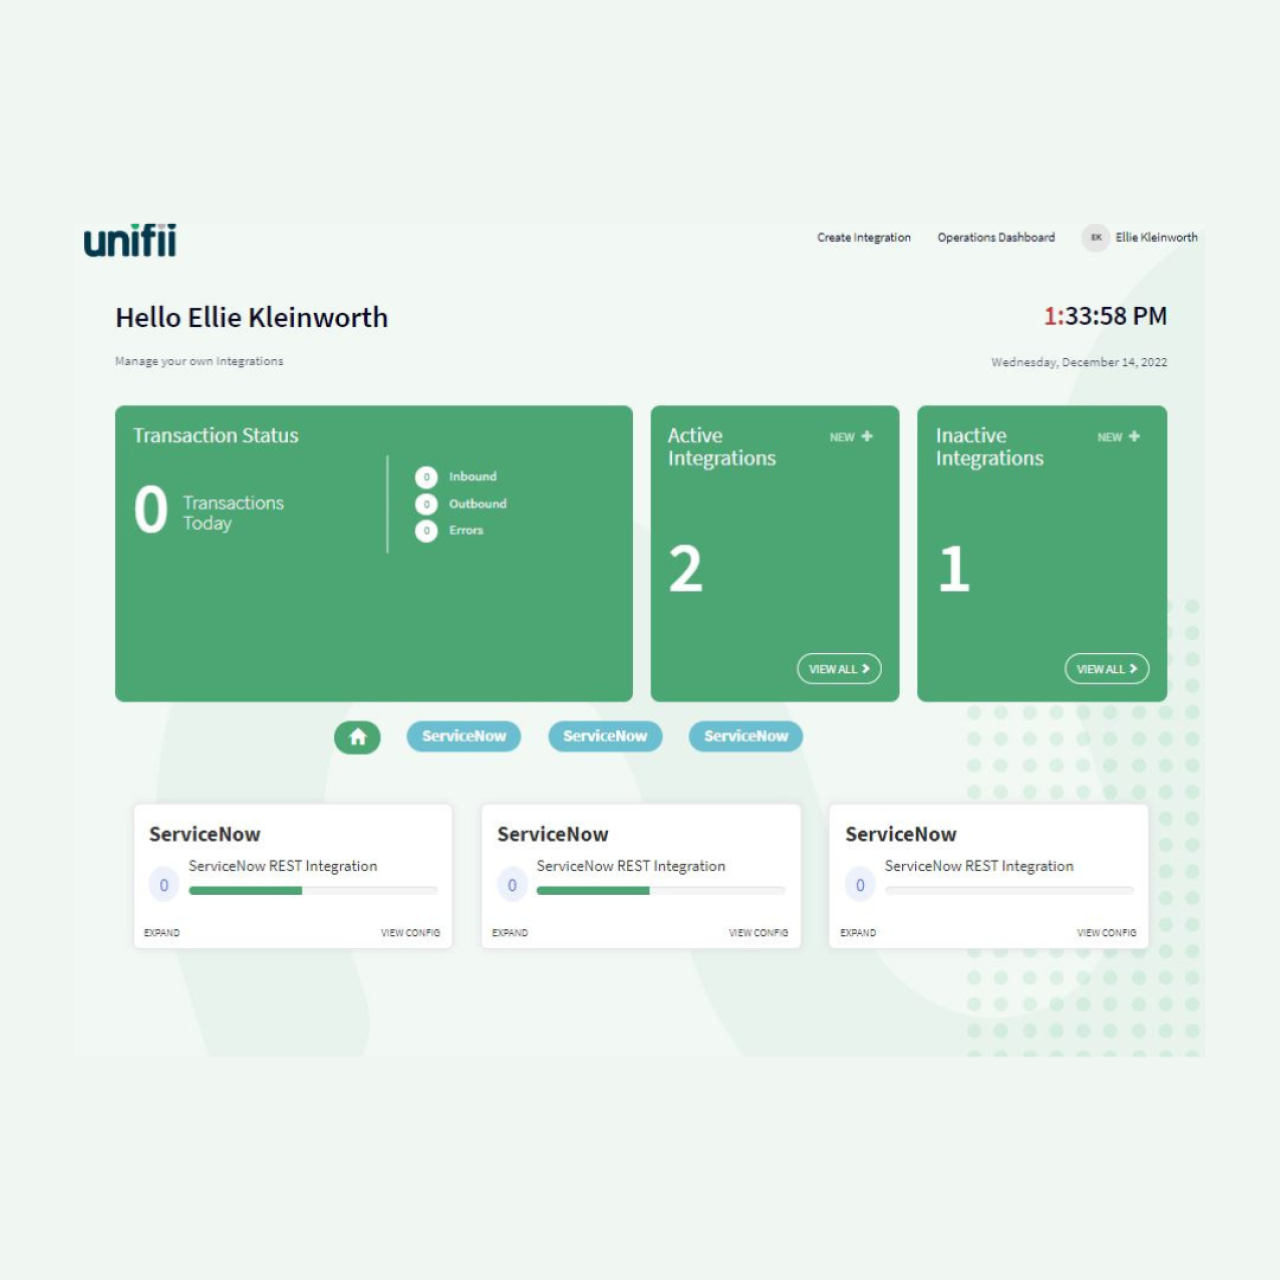 3 ServiceNow apps by Unifii that bring your business to the next level.